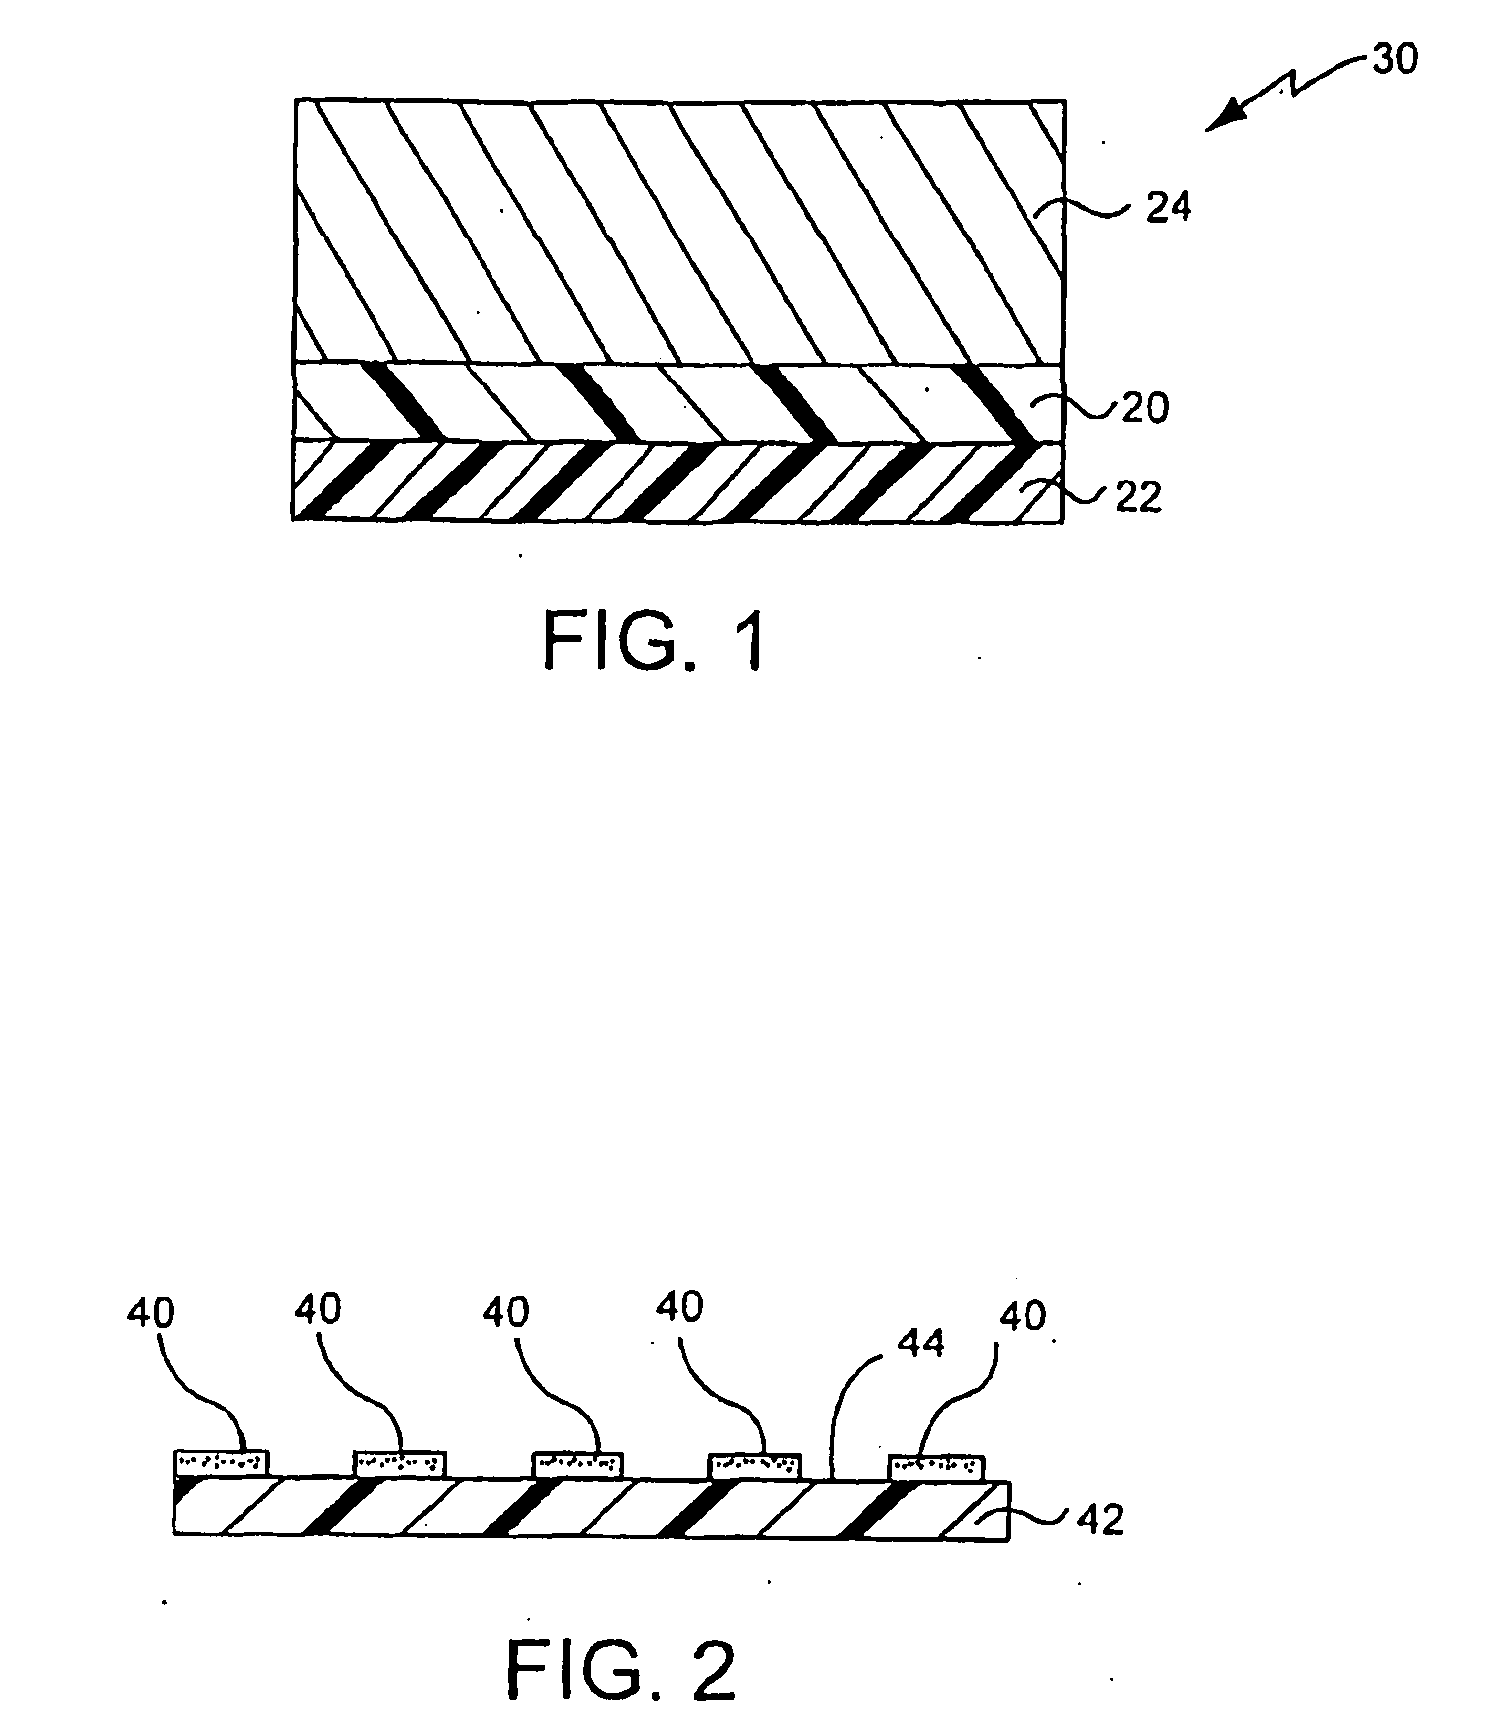 Method and Material for Manufacturing Electrically Conductive Patterns, Including Radio Frequency Identification (RFID) Antennas